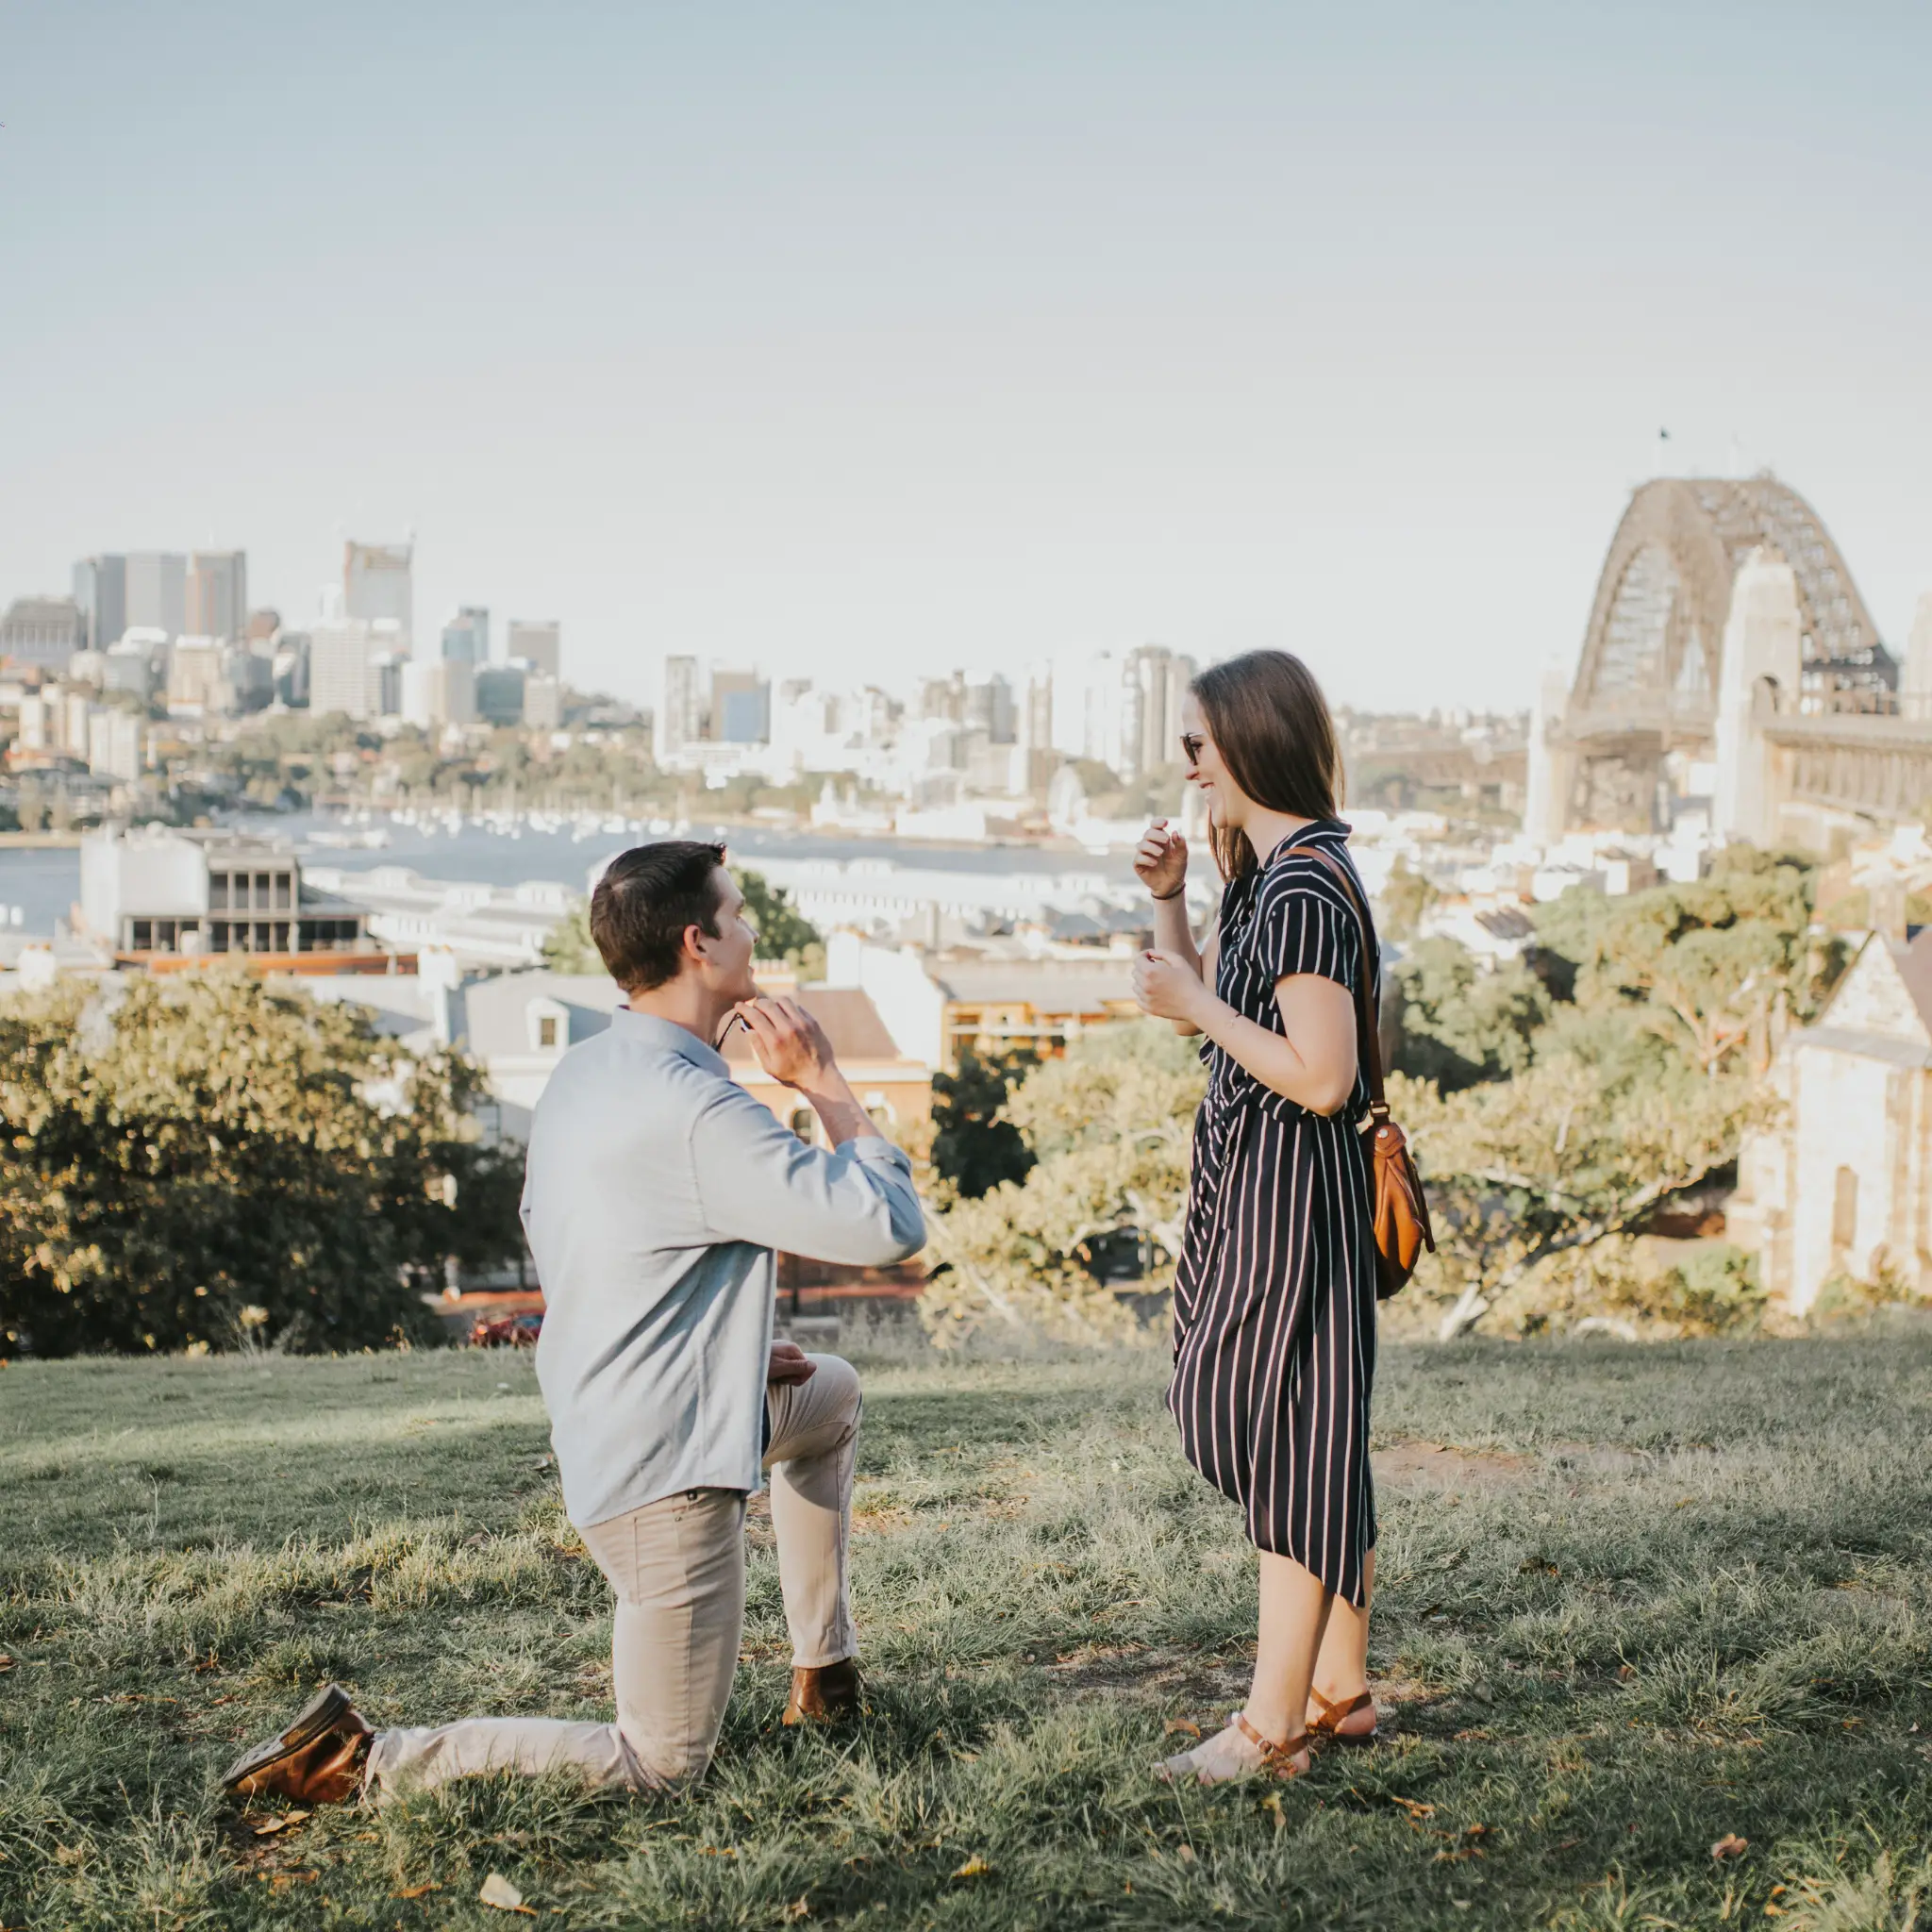 Proposal photoshoot by Steven, Localgrapher in Sydney